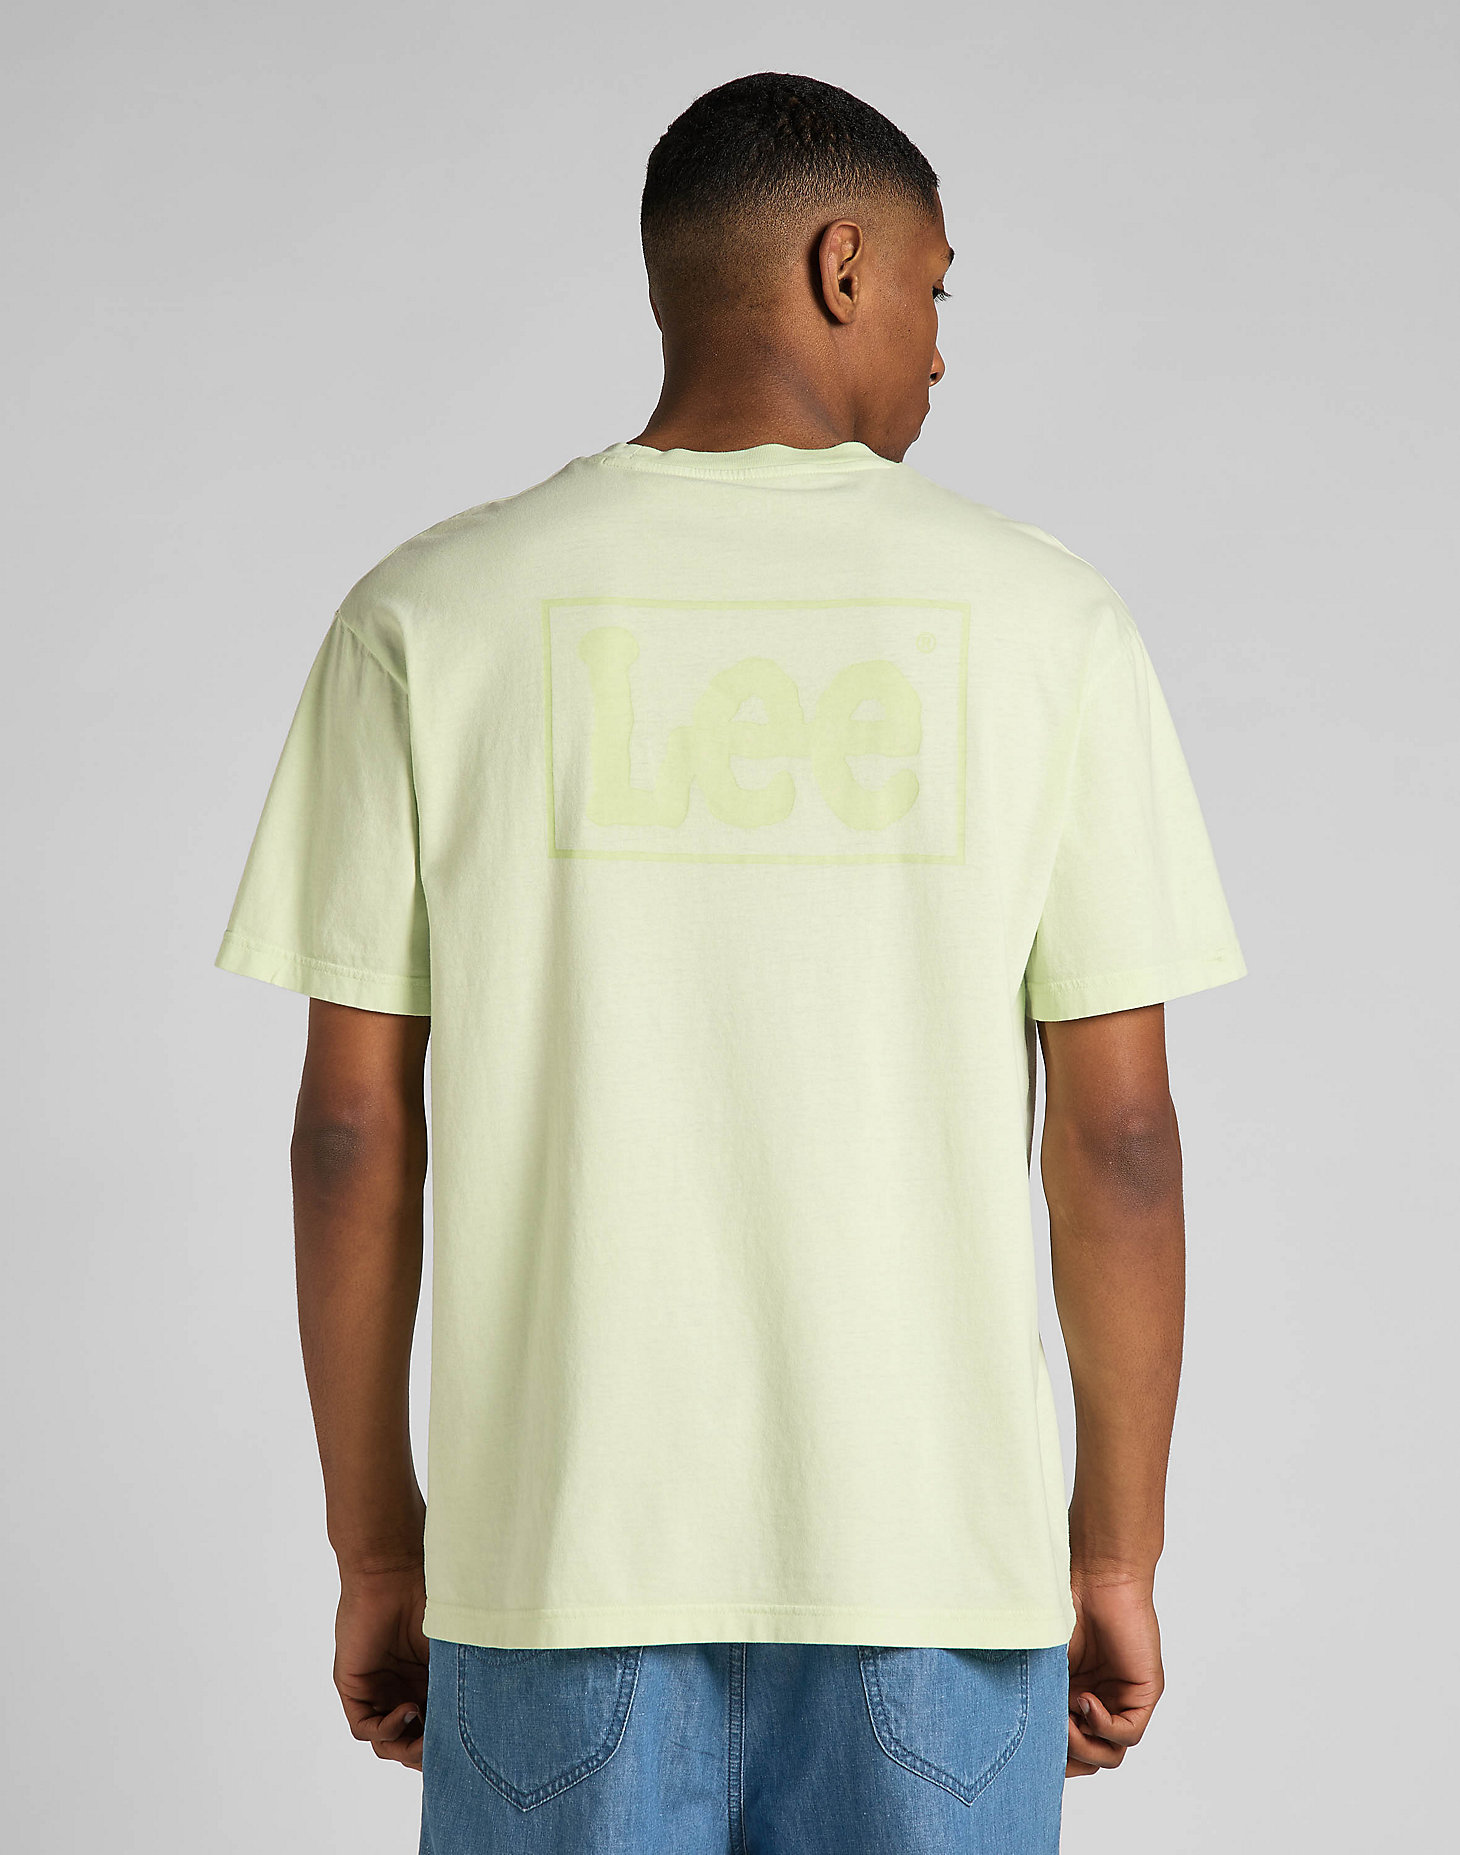 Logo Loose Tee in Canary Green alternative view 1